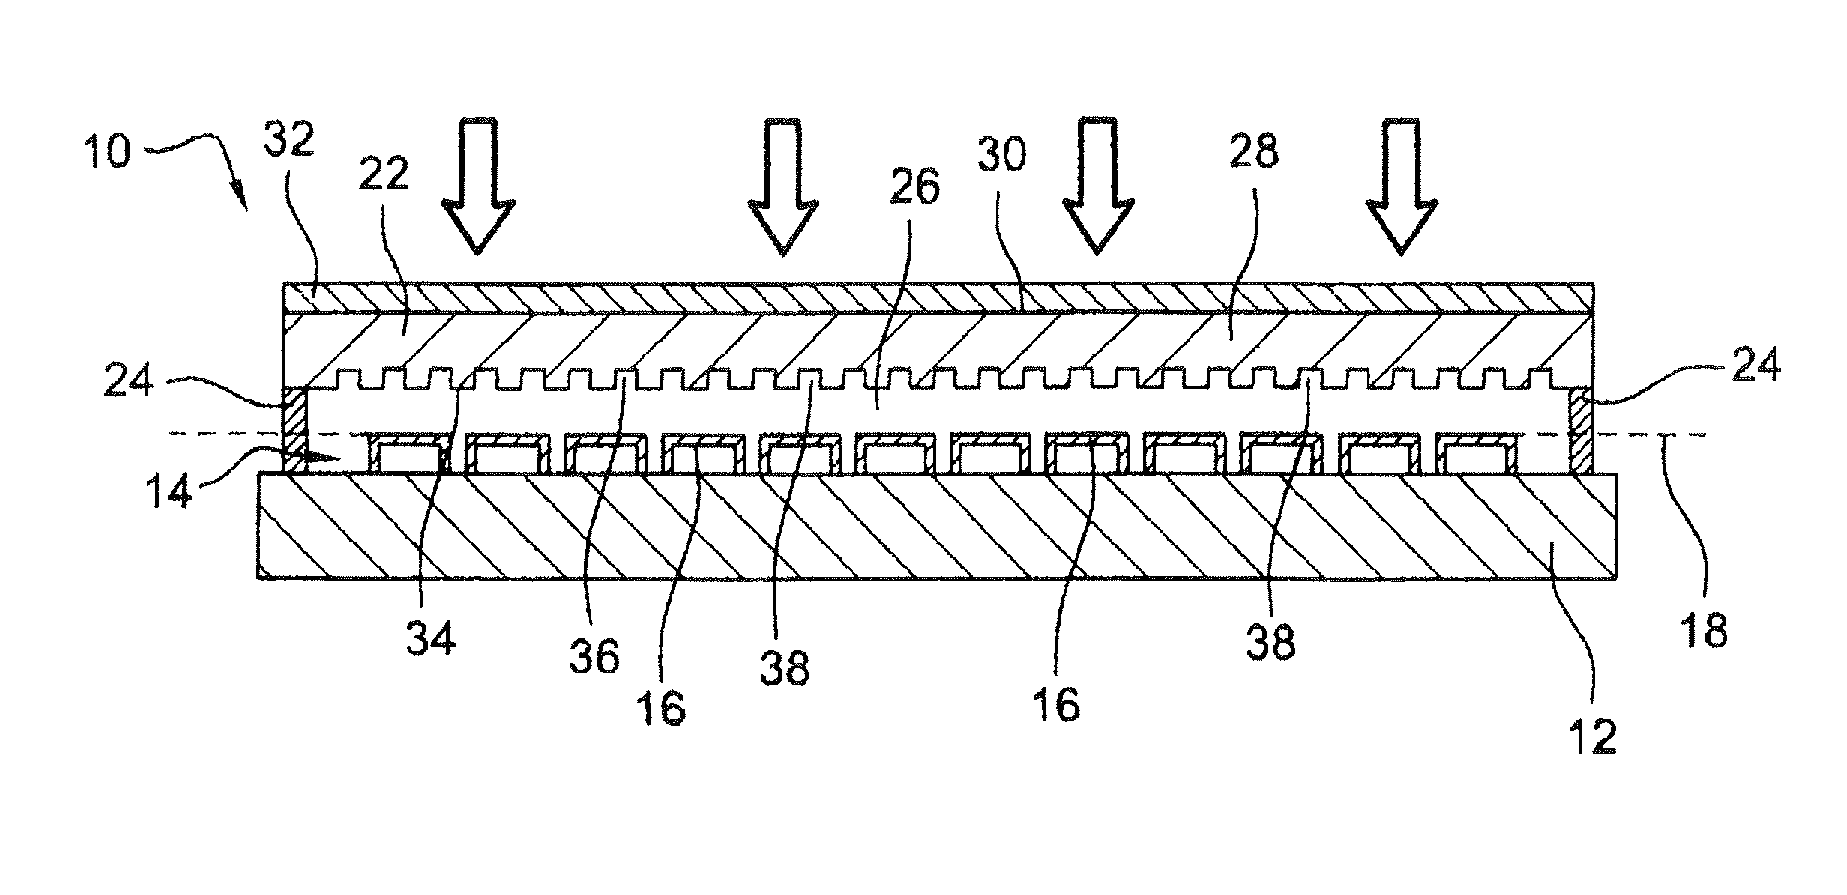 Infrared detector comprising a package integrating at least one diffraction grating